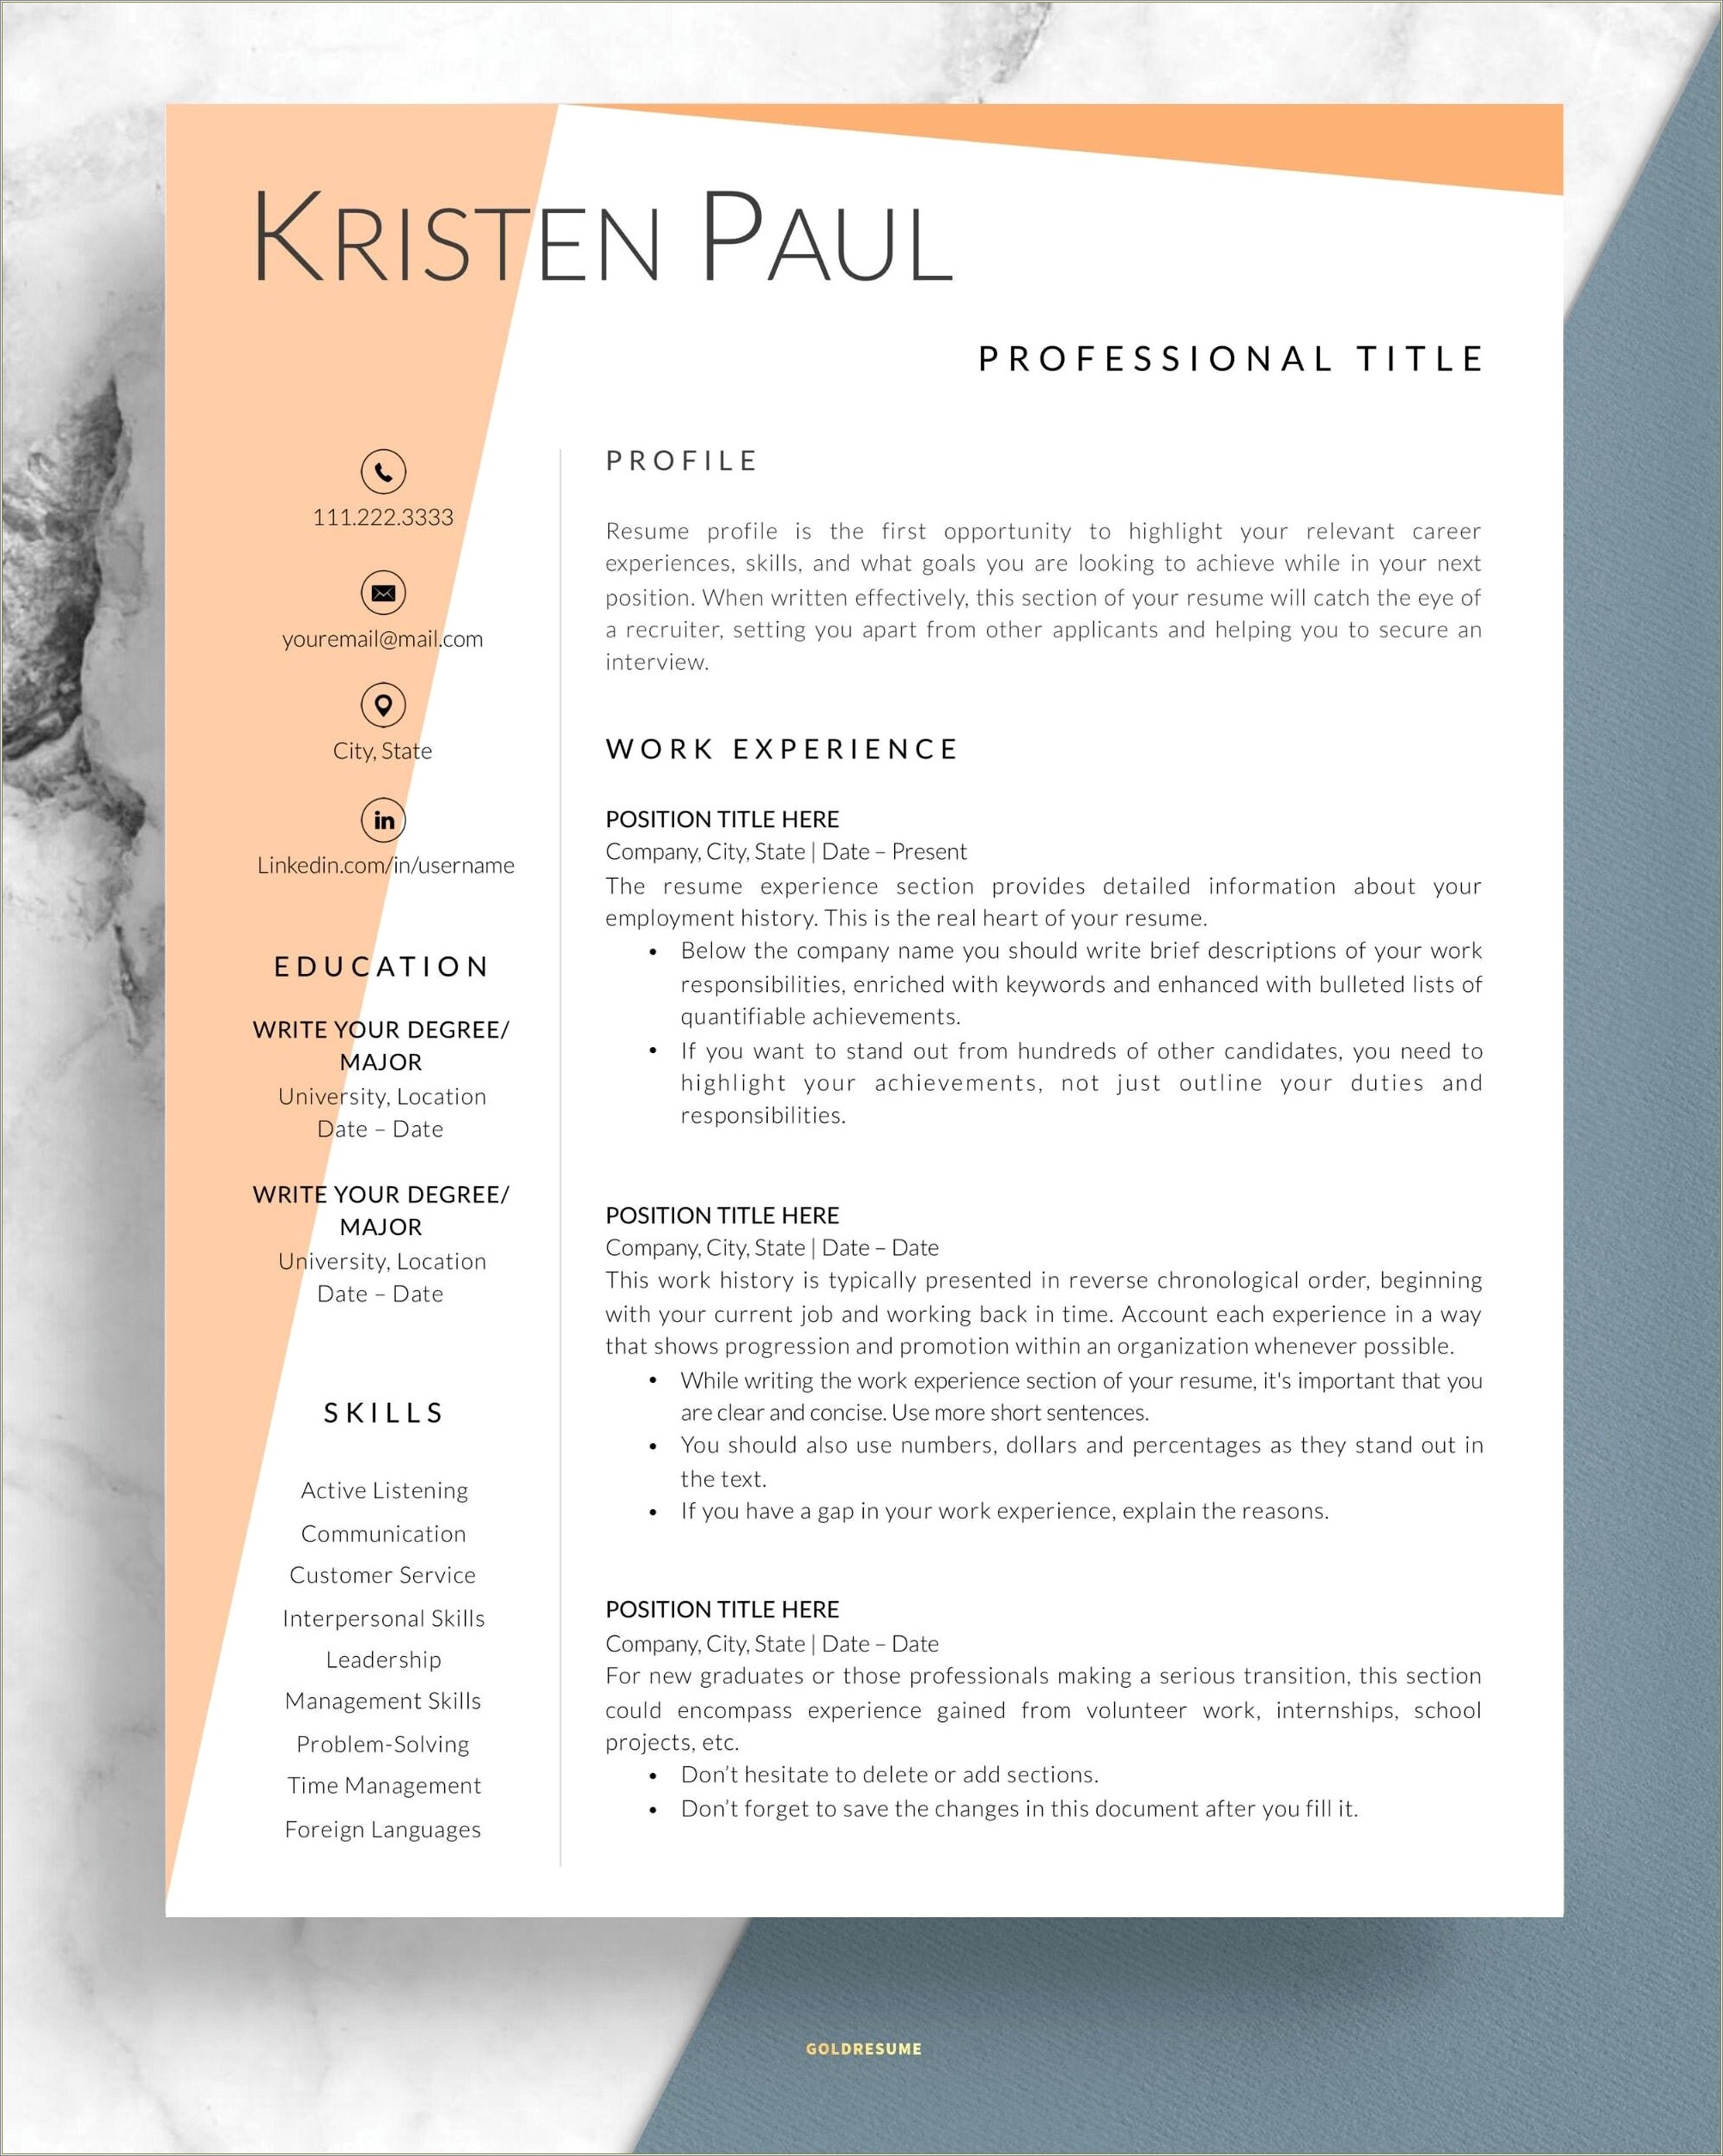 Microsoft Word Resume Cover Page Templates Free